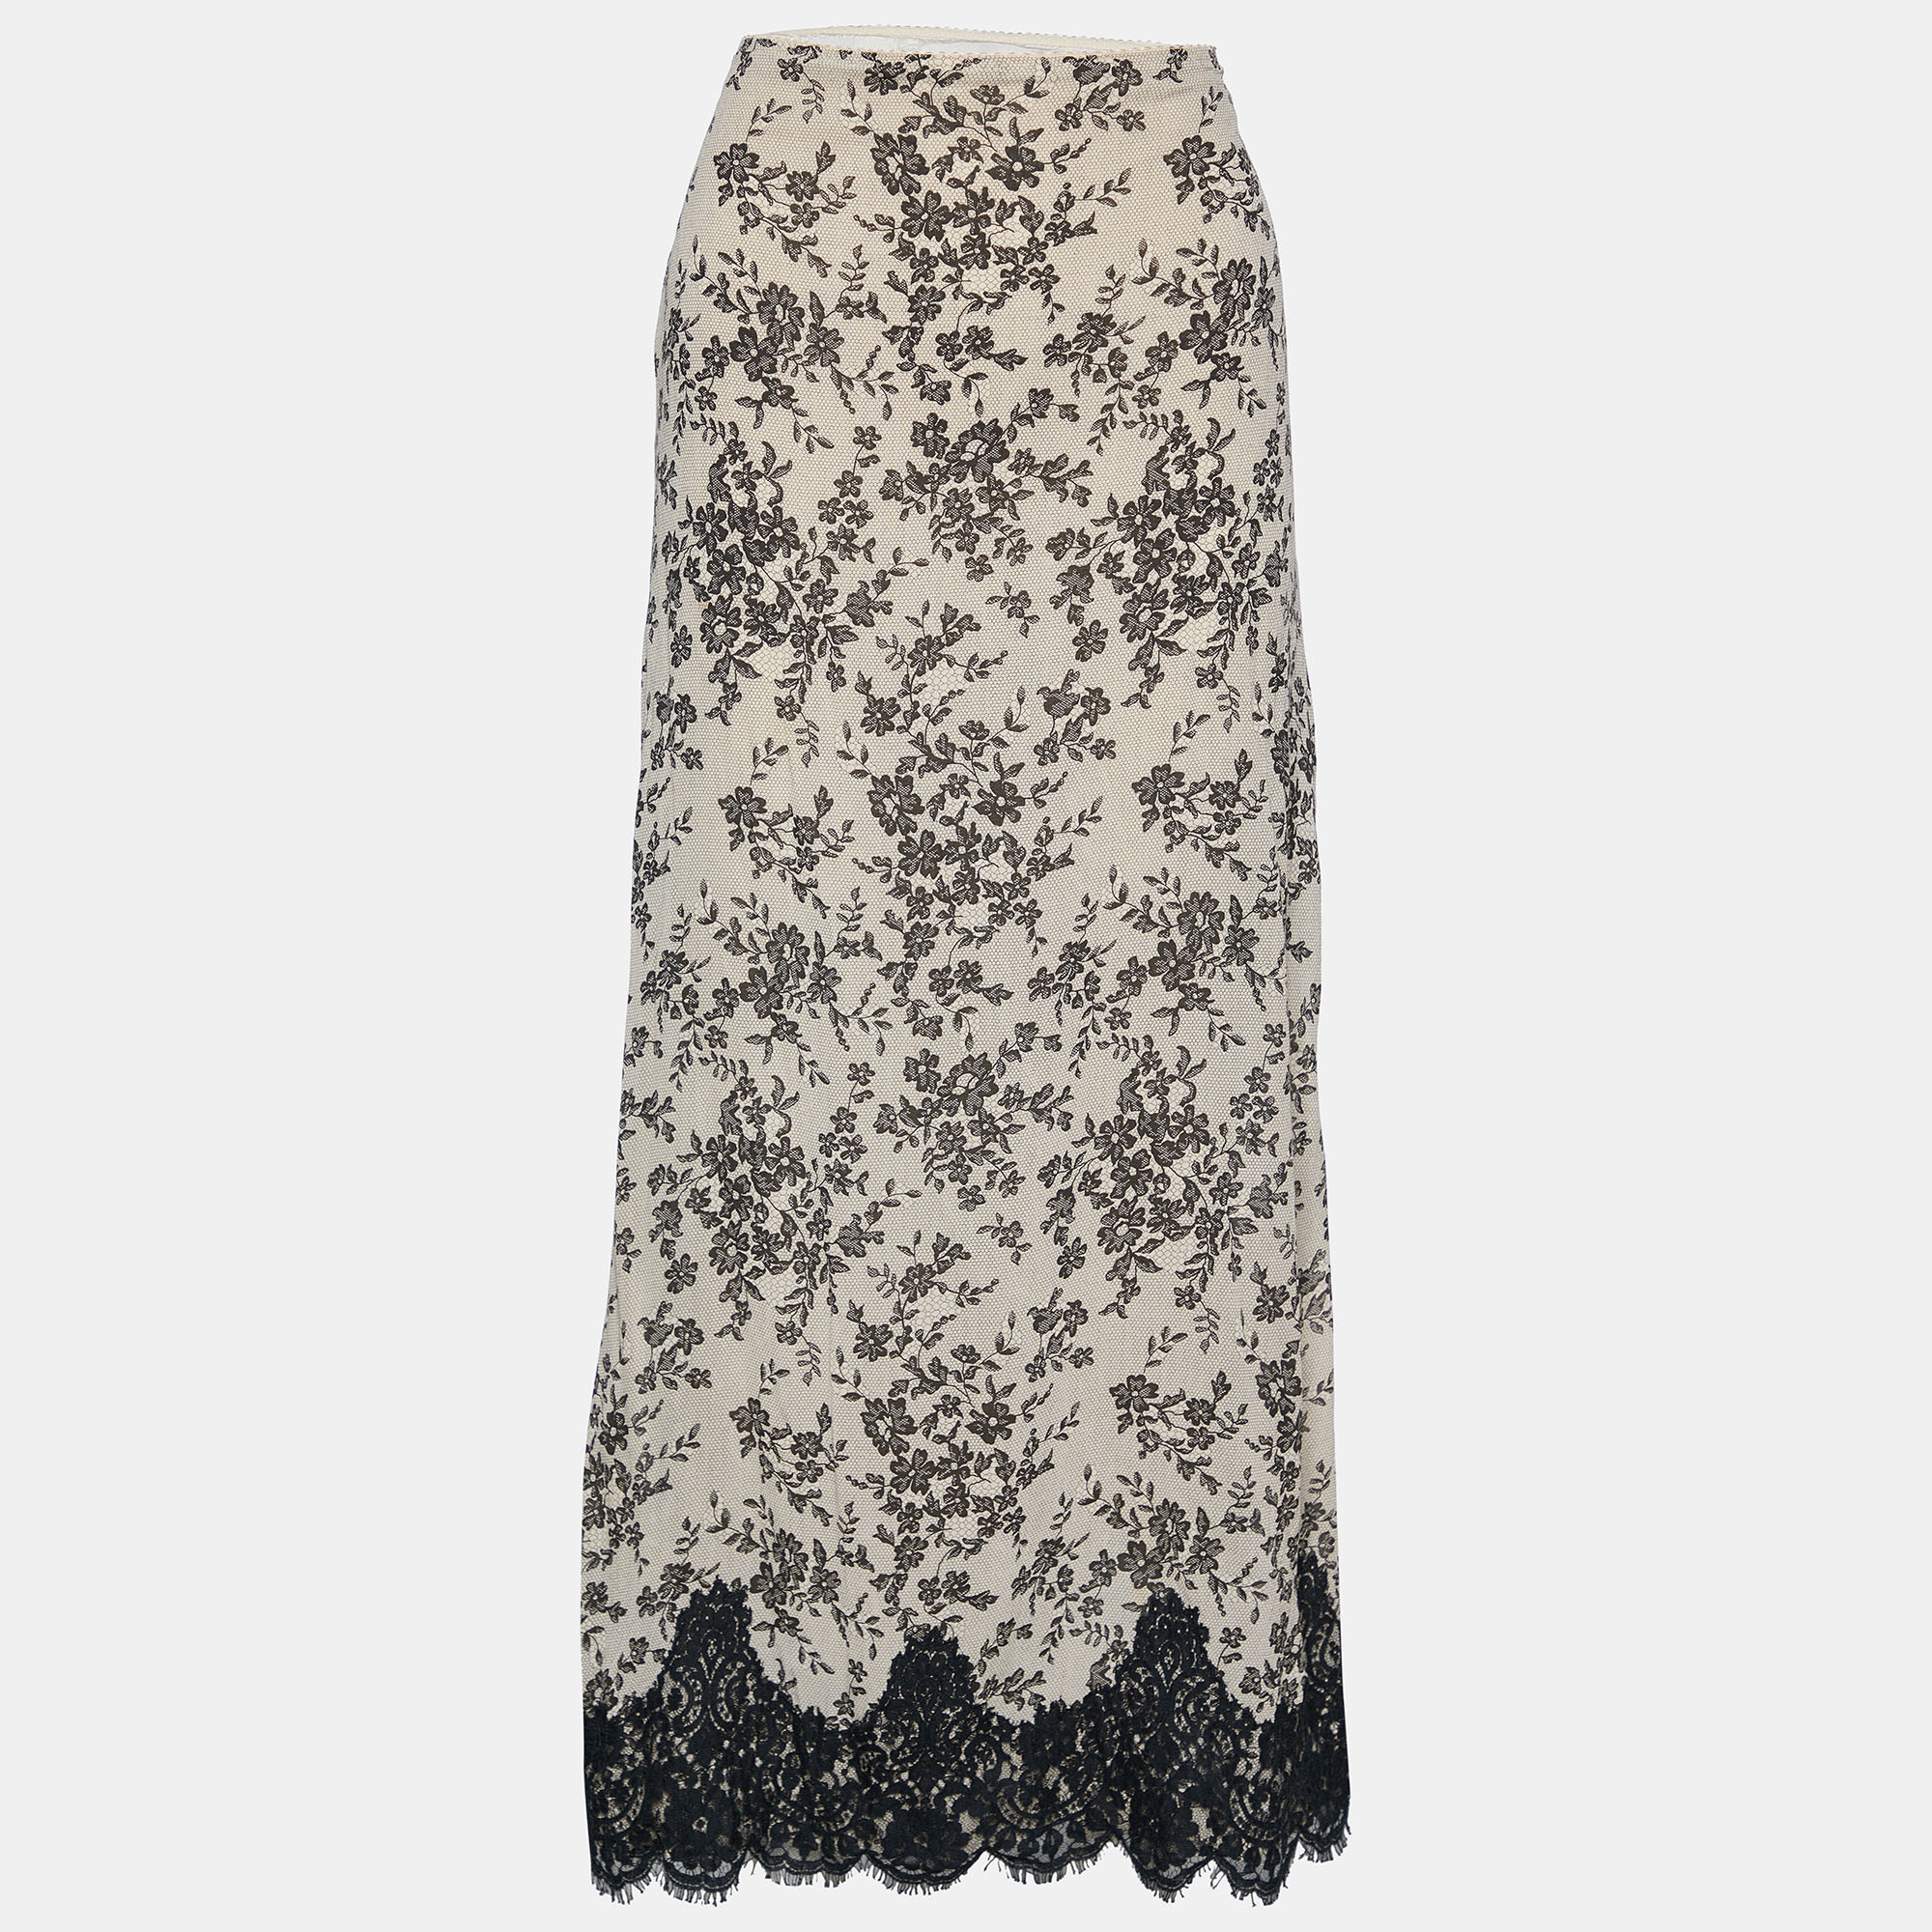 

Moschino Cheap and Chic Beige Floral Printed Crinkled Crepe Midi Skirt